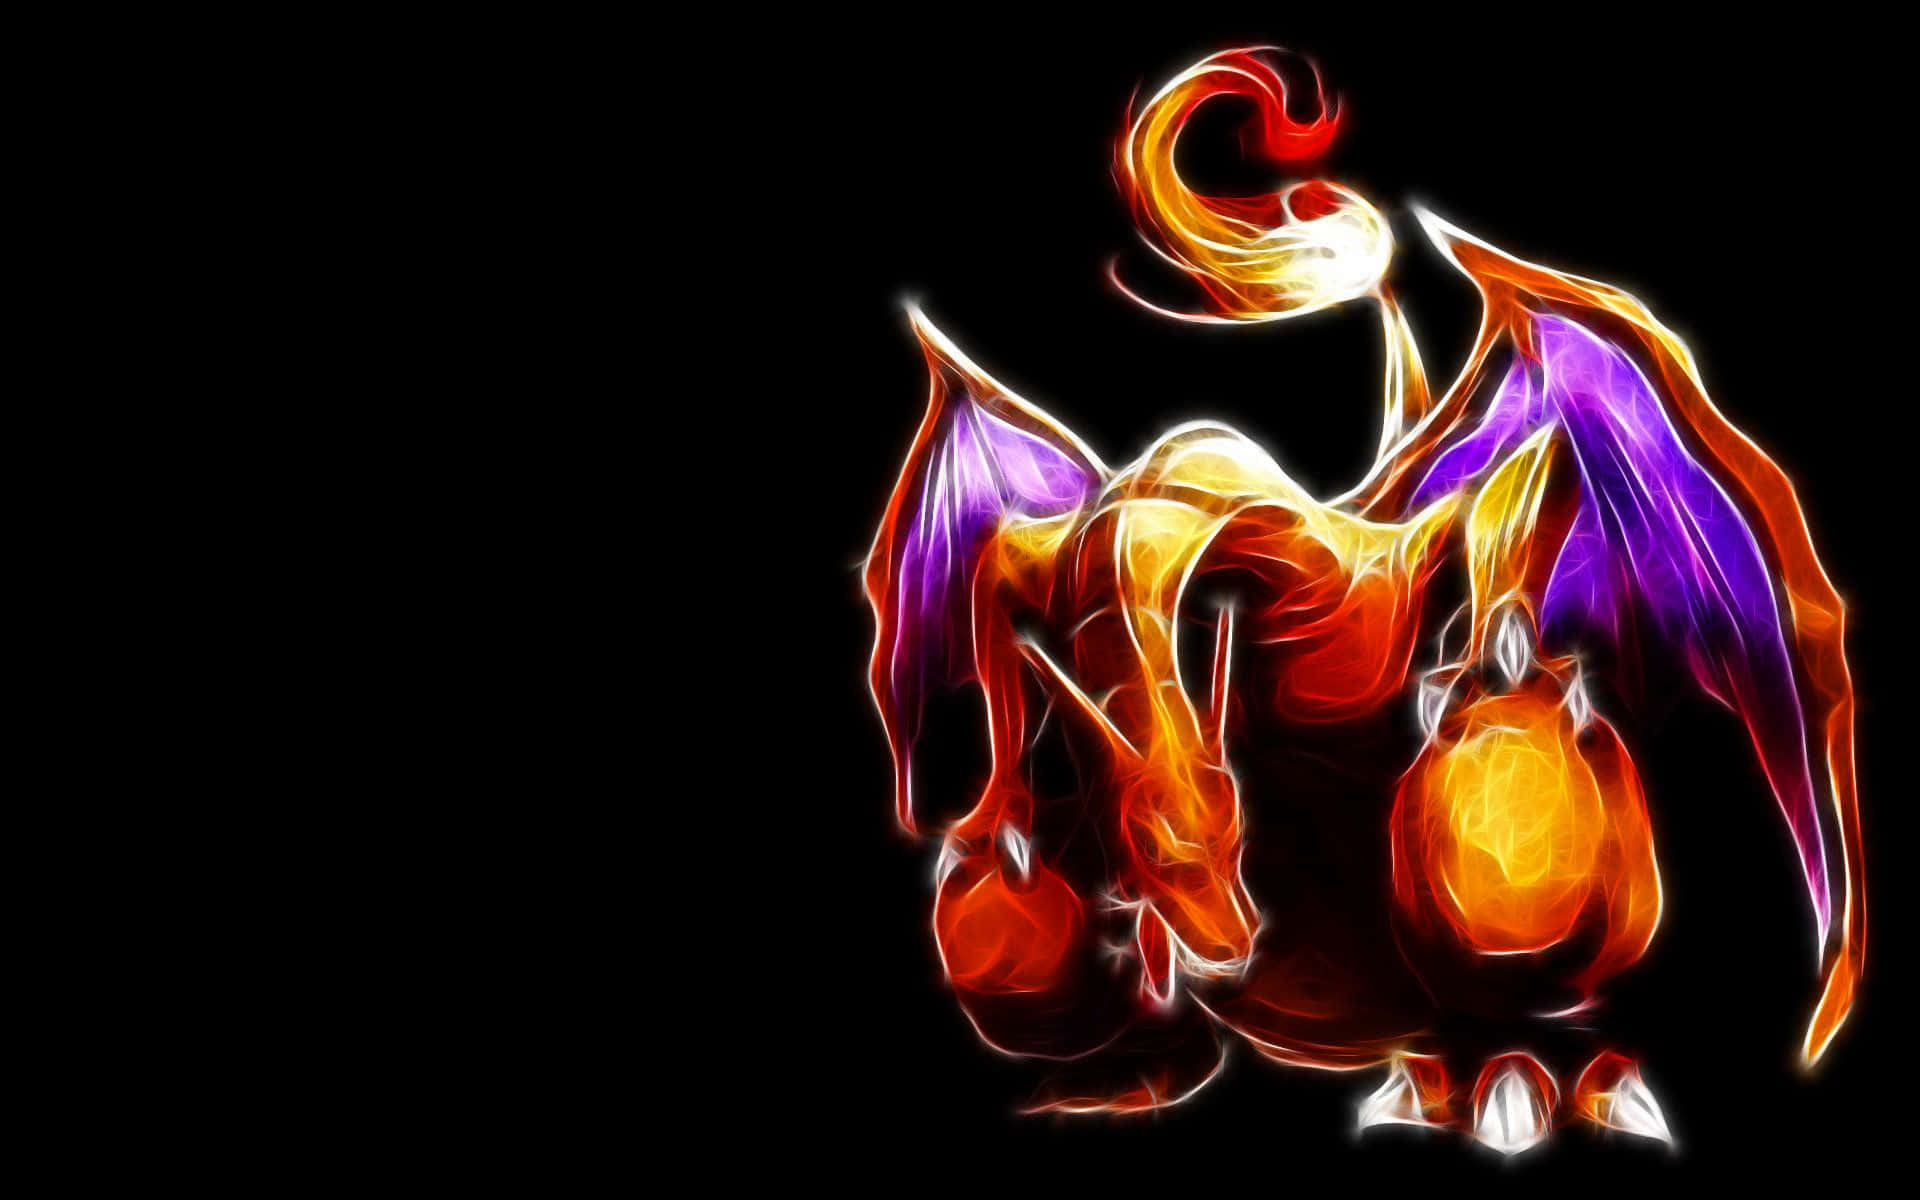 Epic Fire-Breathing Charizard in Action Wallpaper